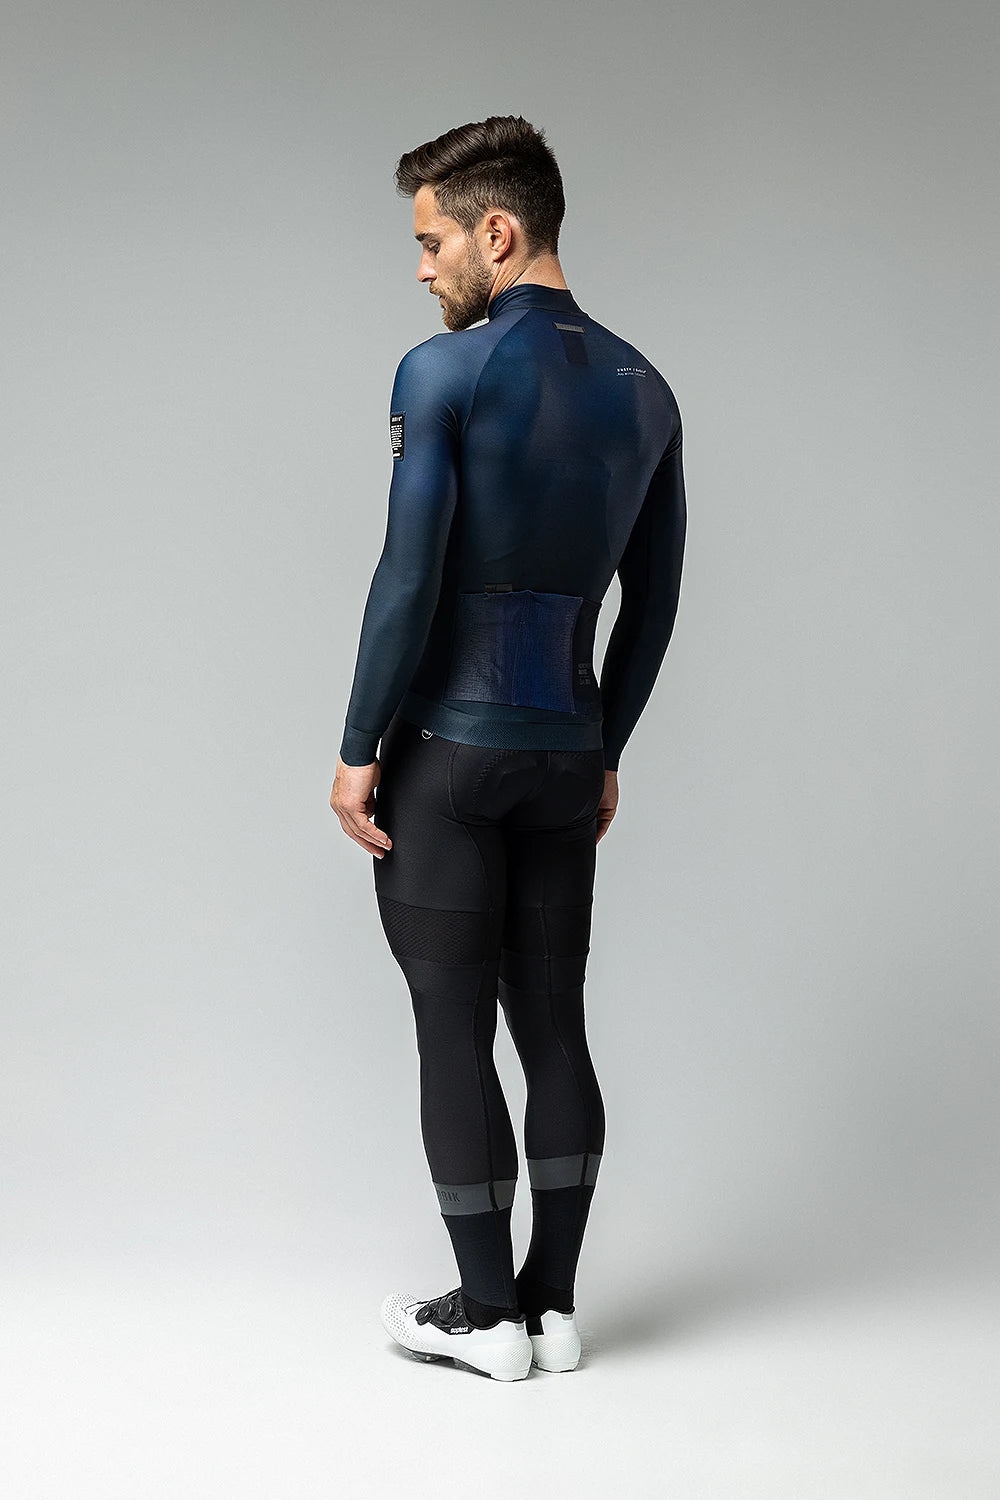 MAILLOT À MANCHES LONGUES HYDER HOMME Muscari